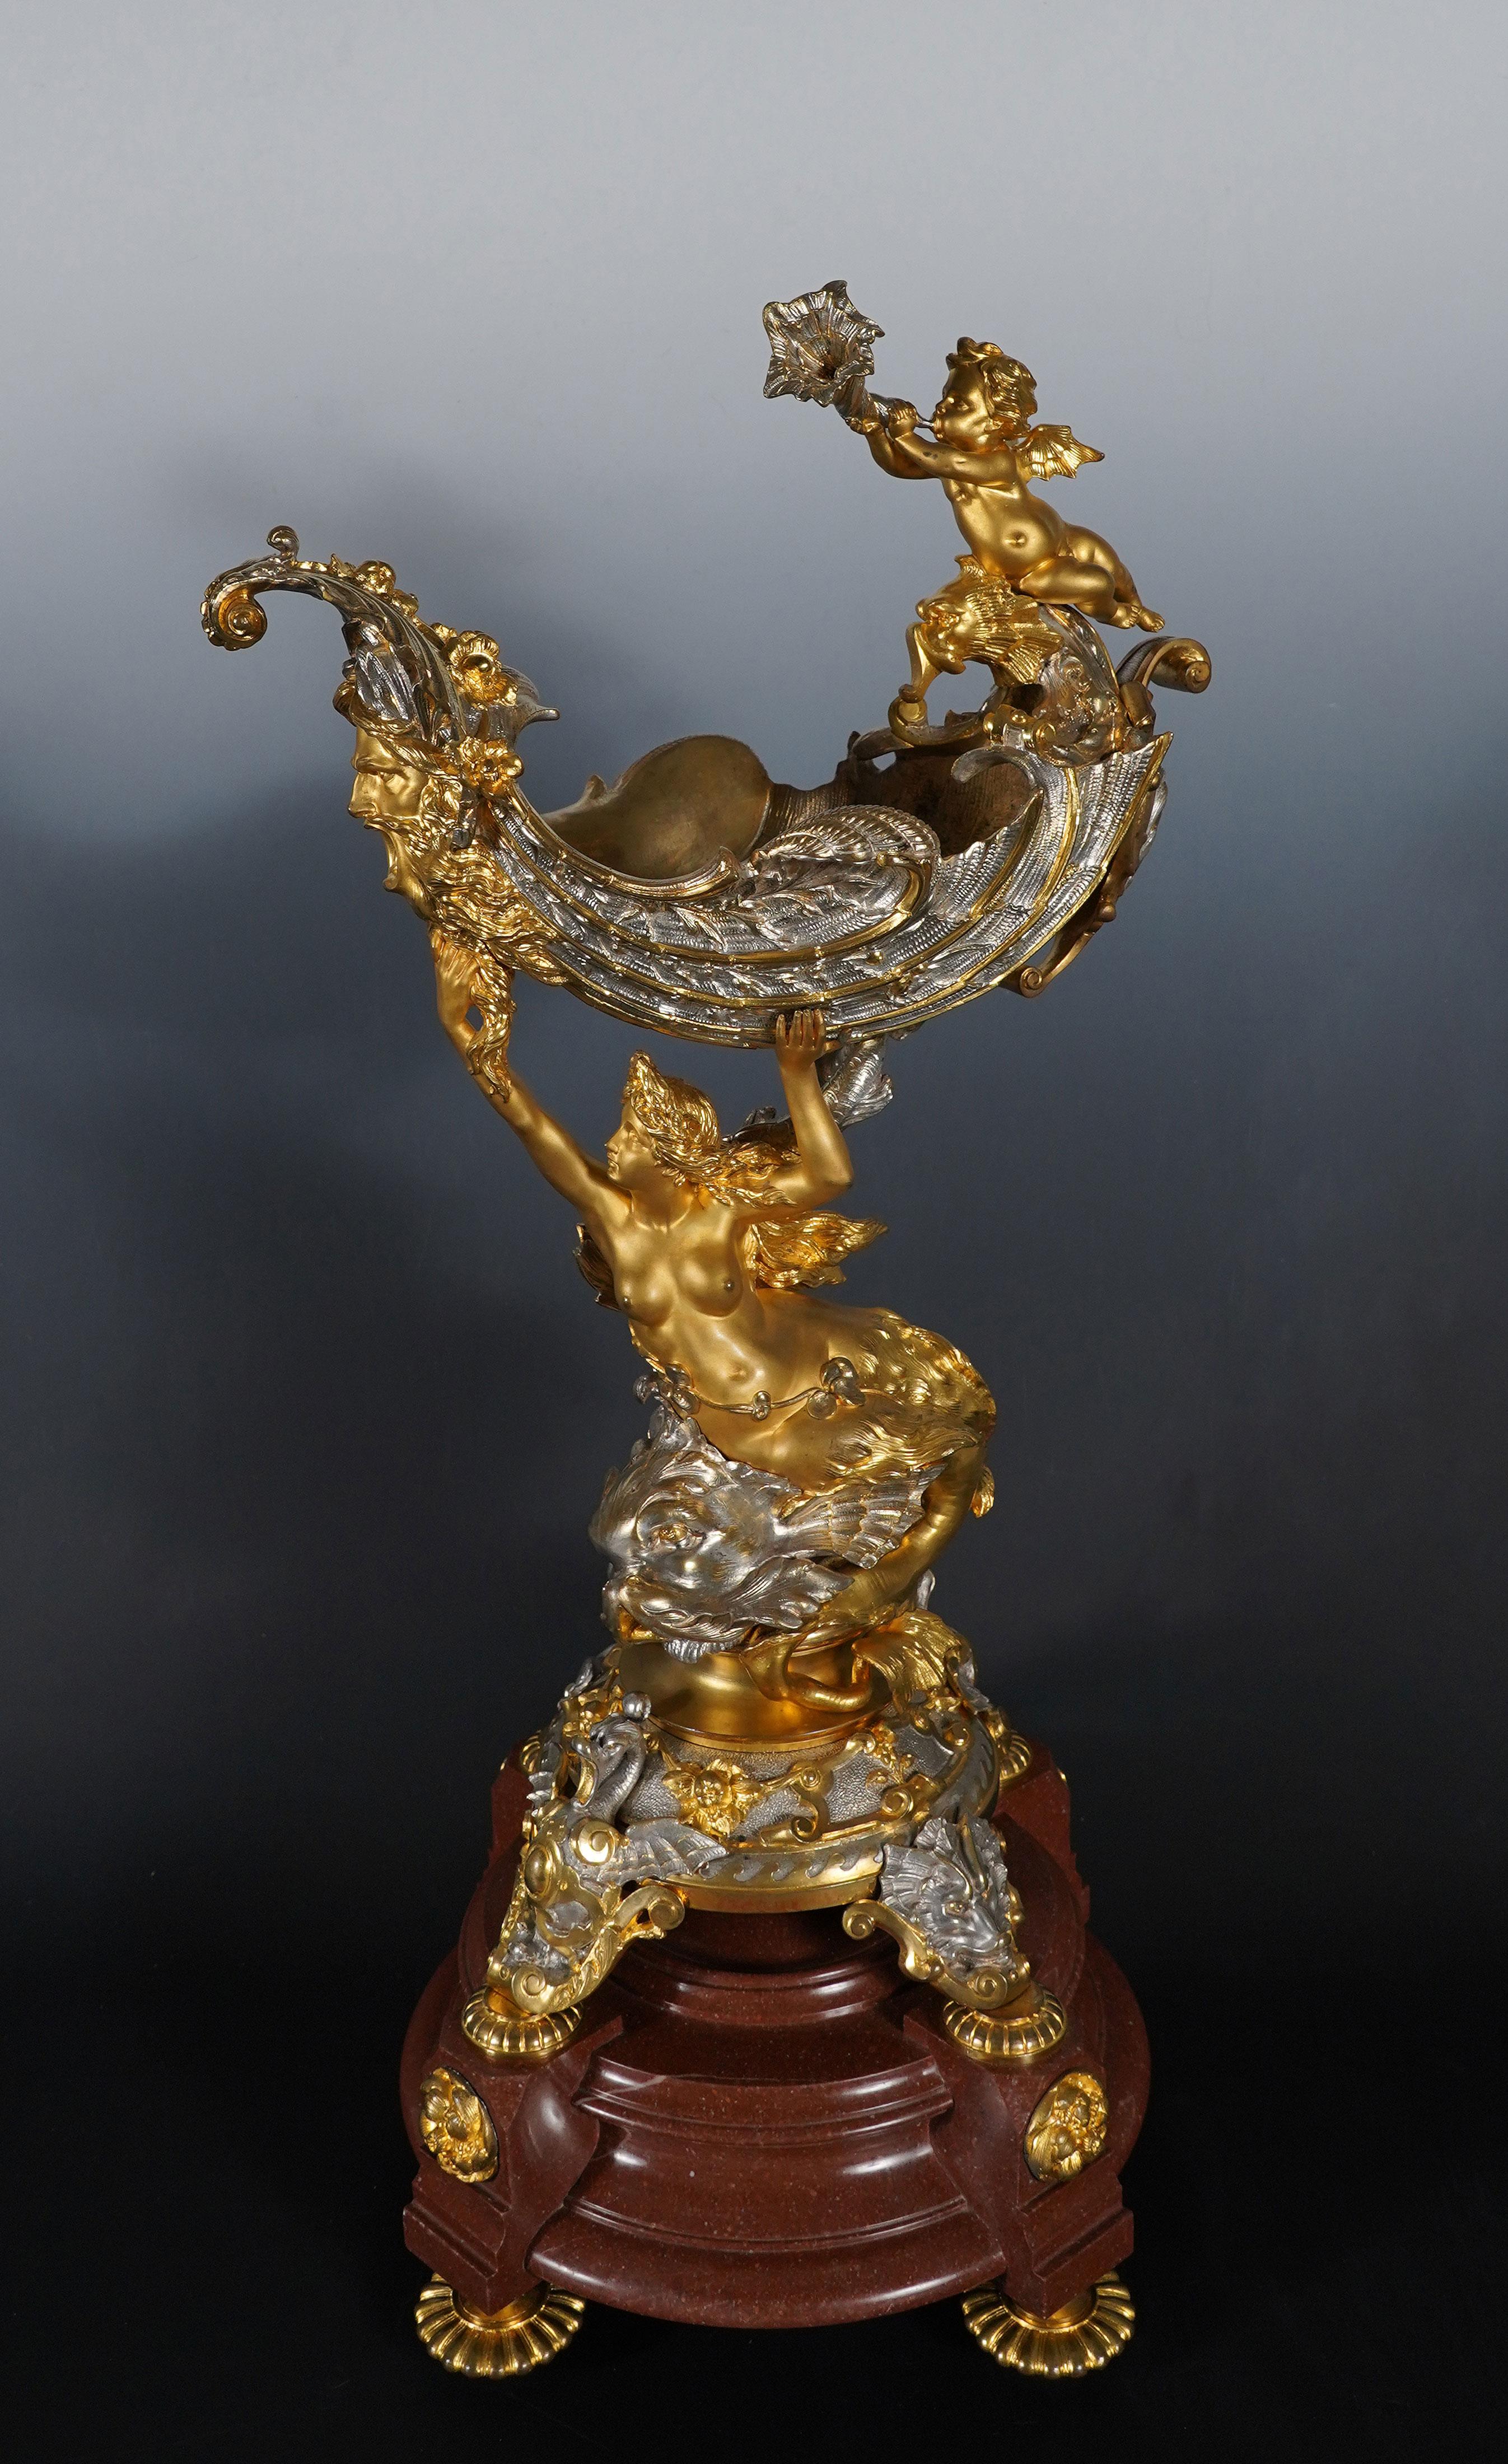 Exceptional centerpiece in silvered and gilded bronze, composed of a naiad riding a dolphin, supporting a chiseled shell decorated with reeds, adorned with the head of a river god on its bow and on which a winged love blows in a conch. The whole